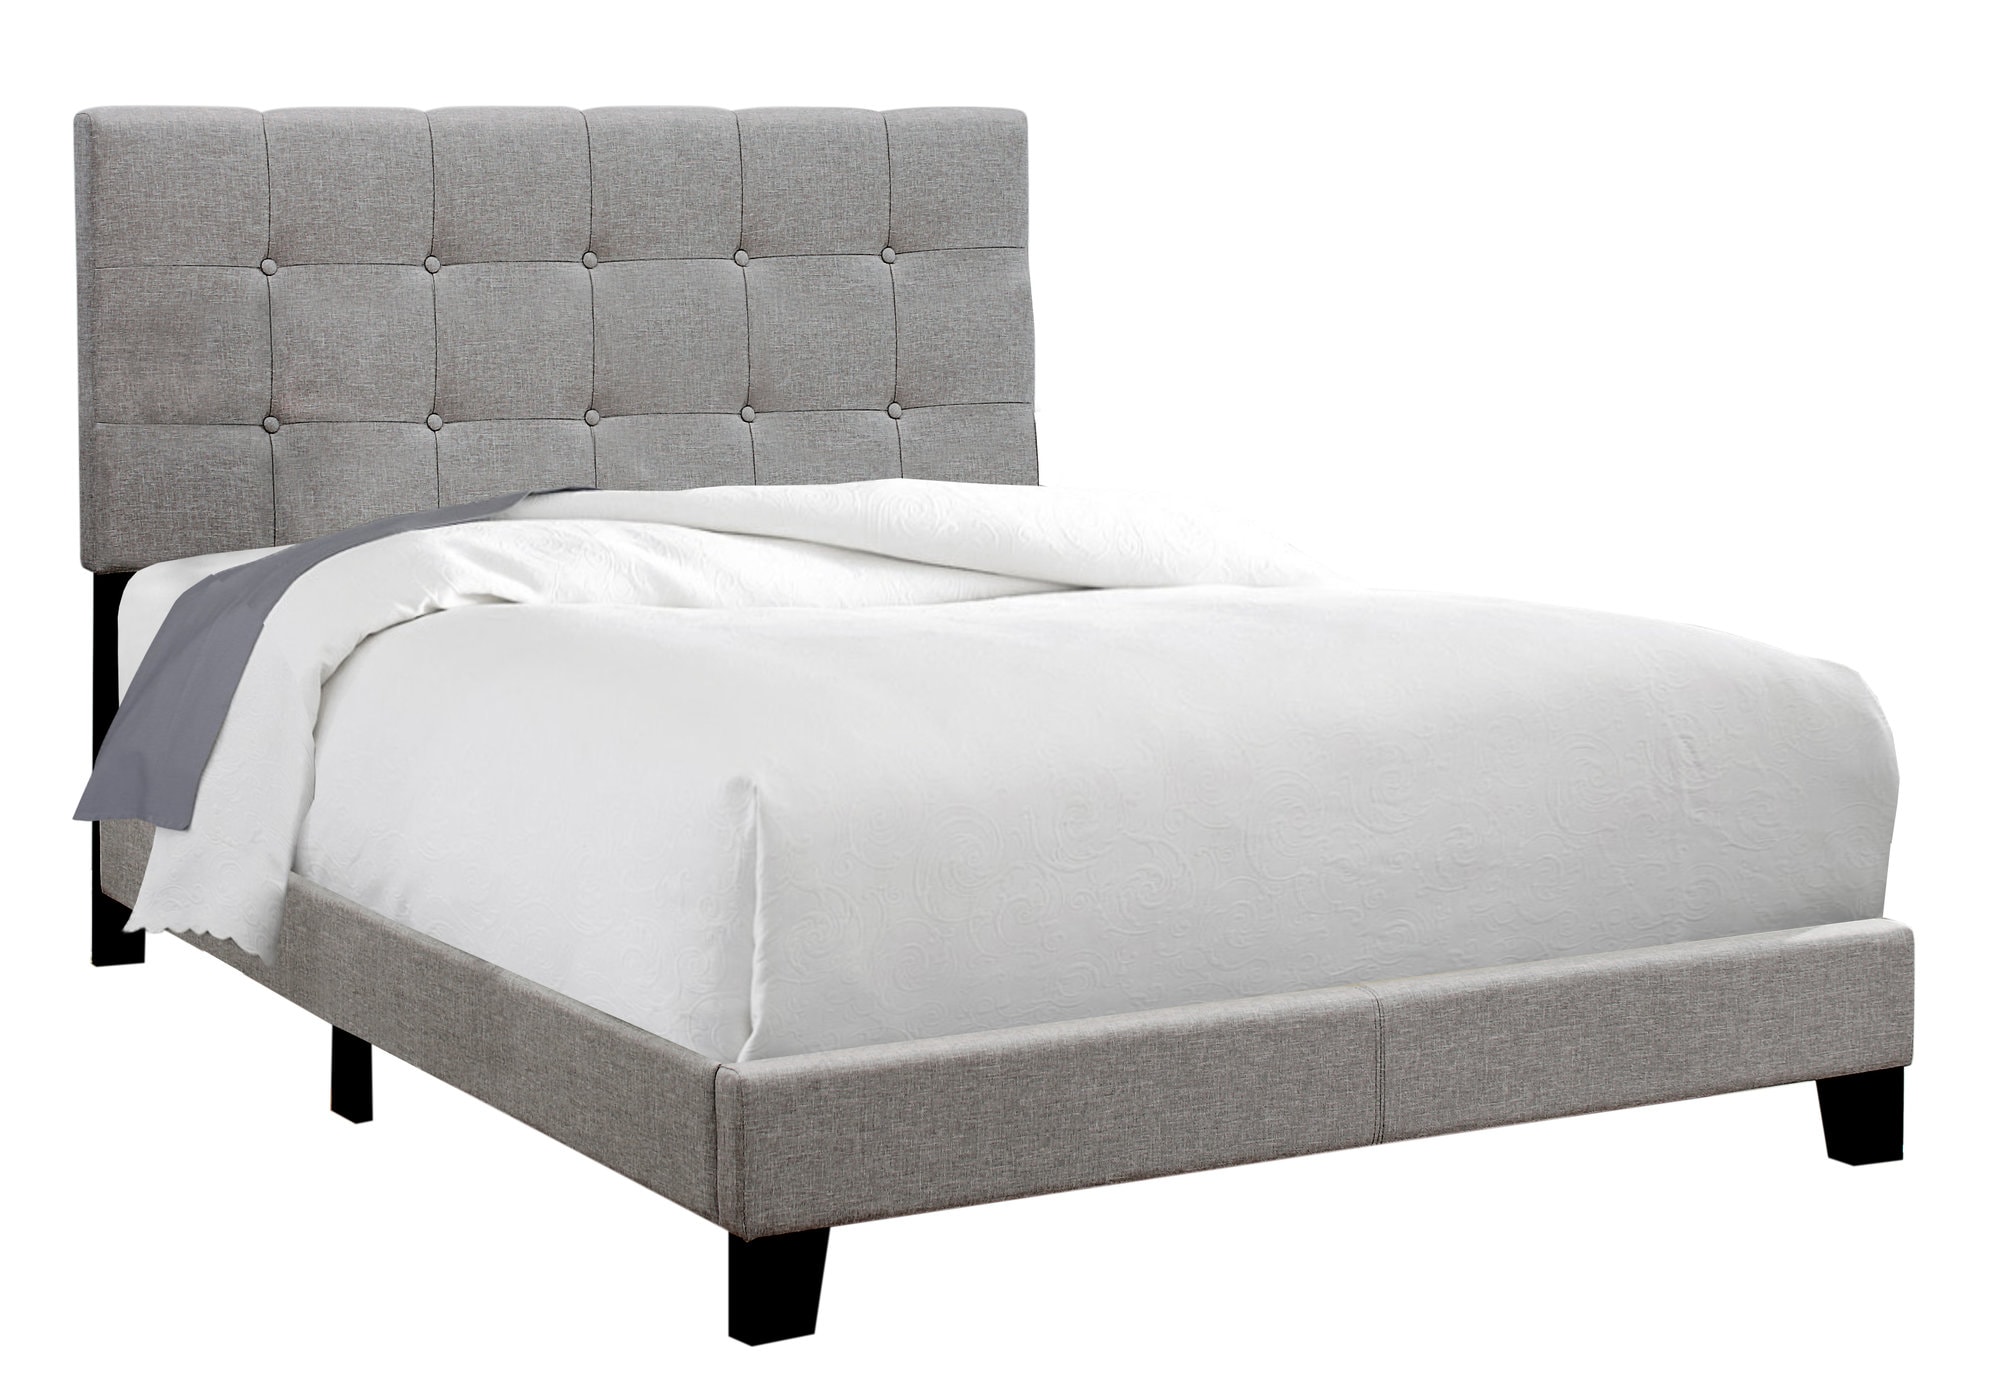 Monarch Specialties Bed Full Size, Full Size Bed Frame